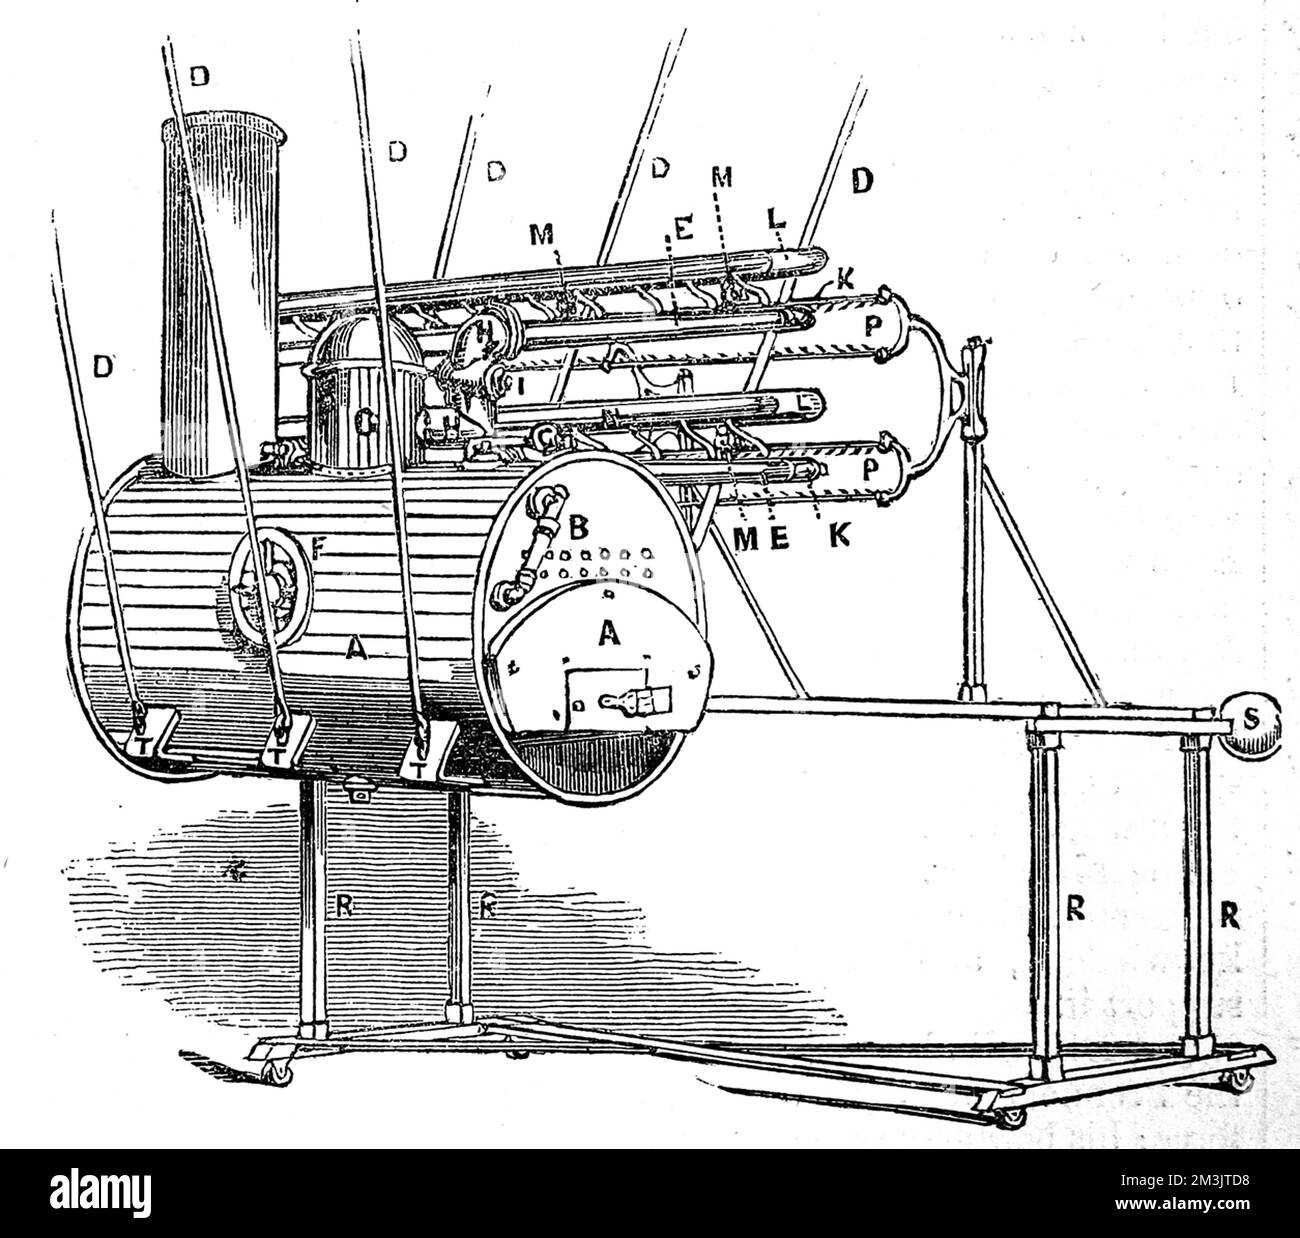 Hydro-electric machine invented by William George Armstrong (1810-1900), later Baron Armstrong of Bamburgh and Cragside, in the 1840's. Originally training as a solicitor, Armstrong was fascinated by mechanics and demonstrated this particular machine at the Literary and Philosophical Society of Newcastle-upon-Tyne to an audience which included famous engineers such as Faraday and Whitworth. The invention utilised high pressure steam issuing through nozzles in the boiler.  1845 Stock Photo